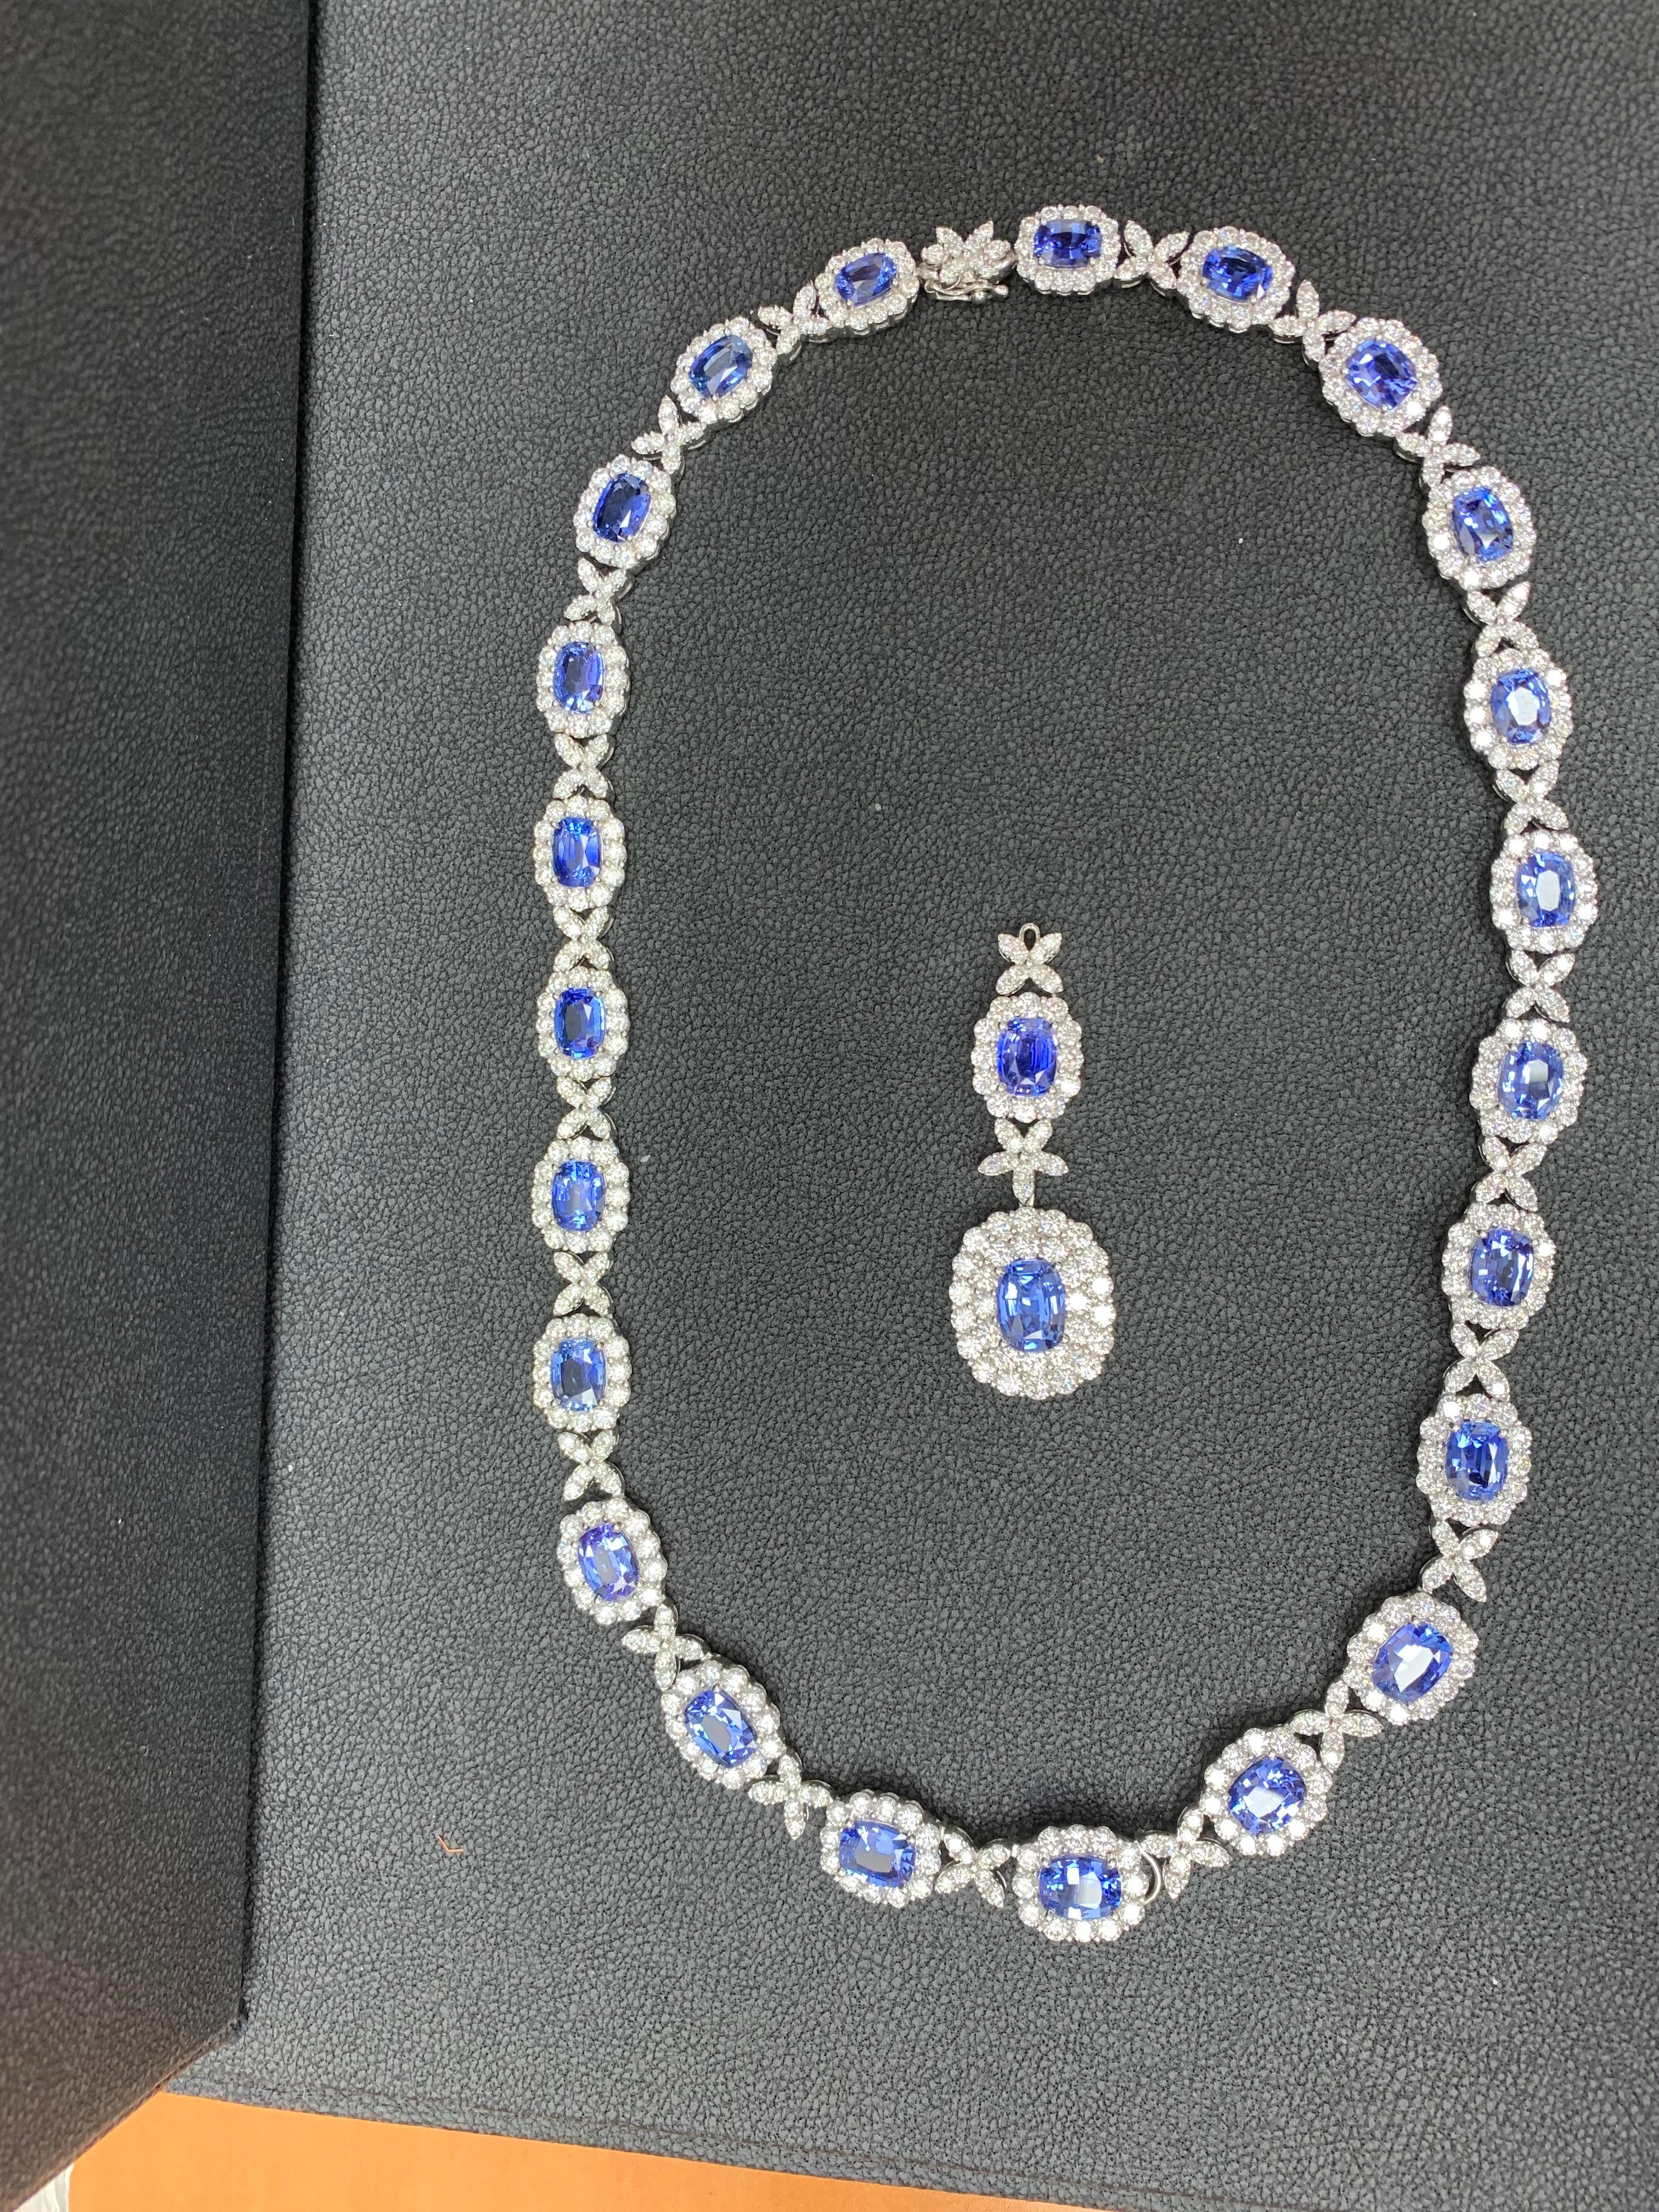 32.91 Carat Oval Cut Sapphire and Diamond Drop Necklace in 18K White Gold For Sale 4